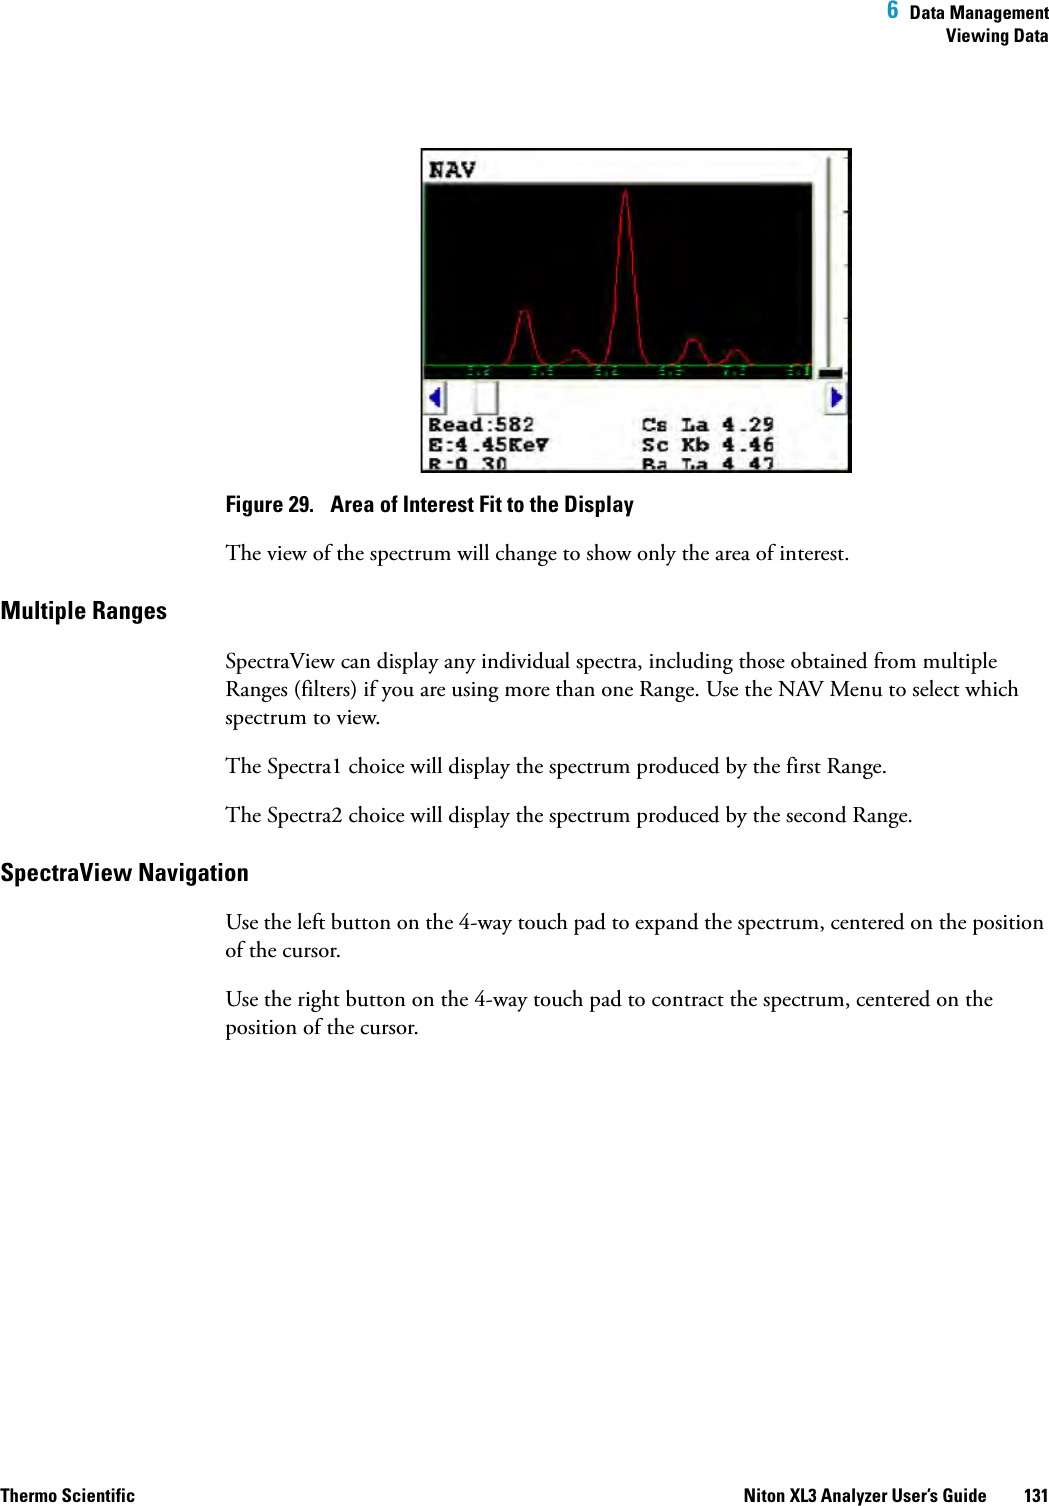  6  Data ManagementViewing DataThermo Scientific Niton XL3 Analyzer User’s Guide 131Figure 29.  Area of Interest Fit to the DisplayThe view of the spectrum will change to show only the area of interest.Multiple Ranges SpectraView can display any individual spectra, including those obtained from multiple Ranges (filters) if you are using more than one Range. Use the NAV Menu to select which spectrum to view.The Spectra1 choice will display the spectrum produced by the first Range.The Spectra2 choice will display the spectrum produced by the second Range.SpectraView Navigation Use the left button on the 4-way touch pad to expand the spectrum, centered on the position of the cursor. Use the right button on the 4-way touch pad to contract the spectrum, centered on the position of the cursor.